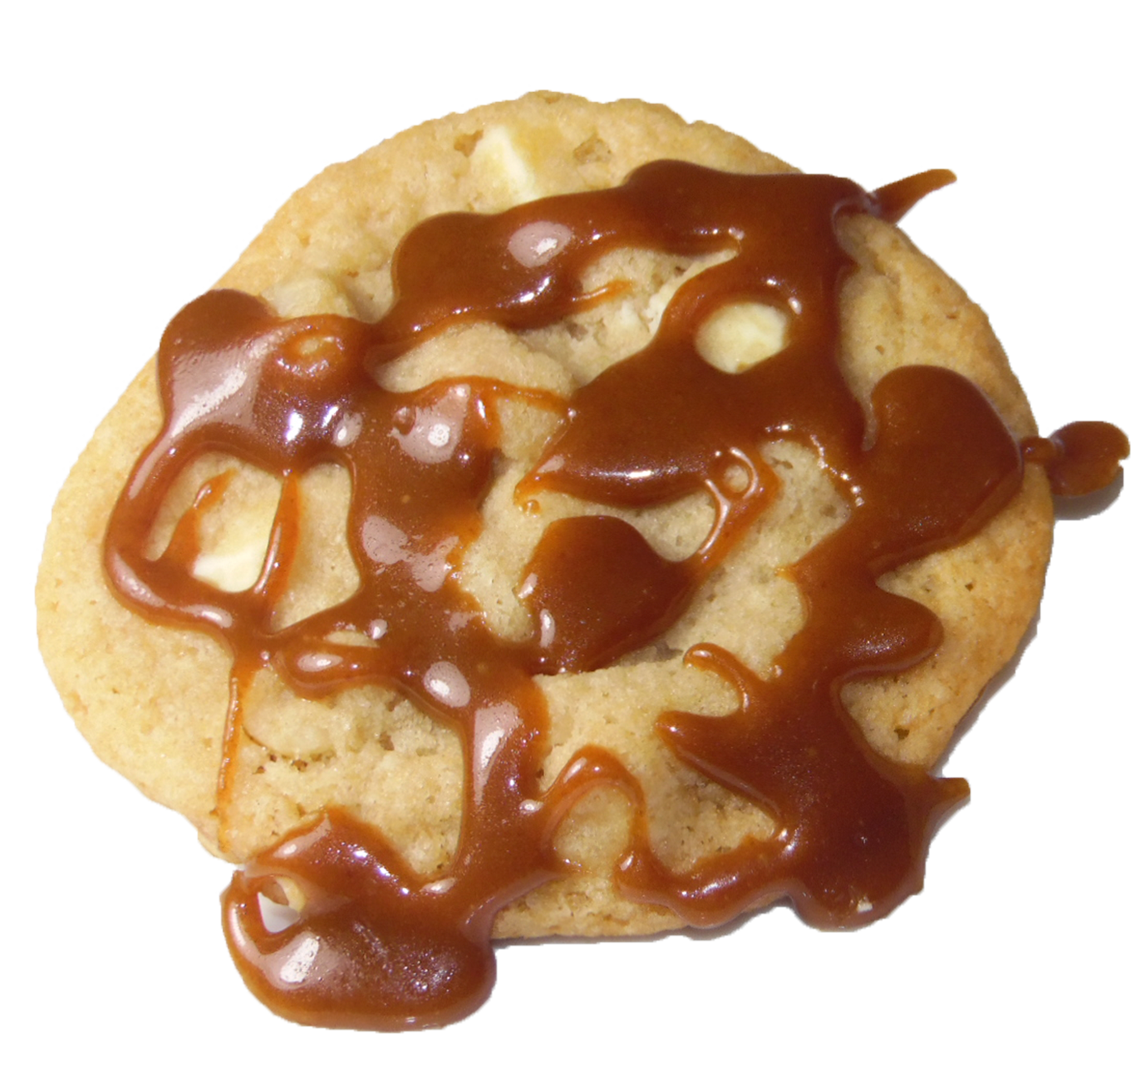 Buttery White Chocolate Chunk Cookie with chopped Macadamia Nuts and Homemade Caramel Drizzle